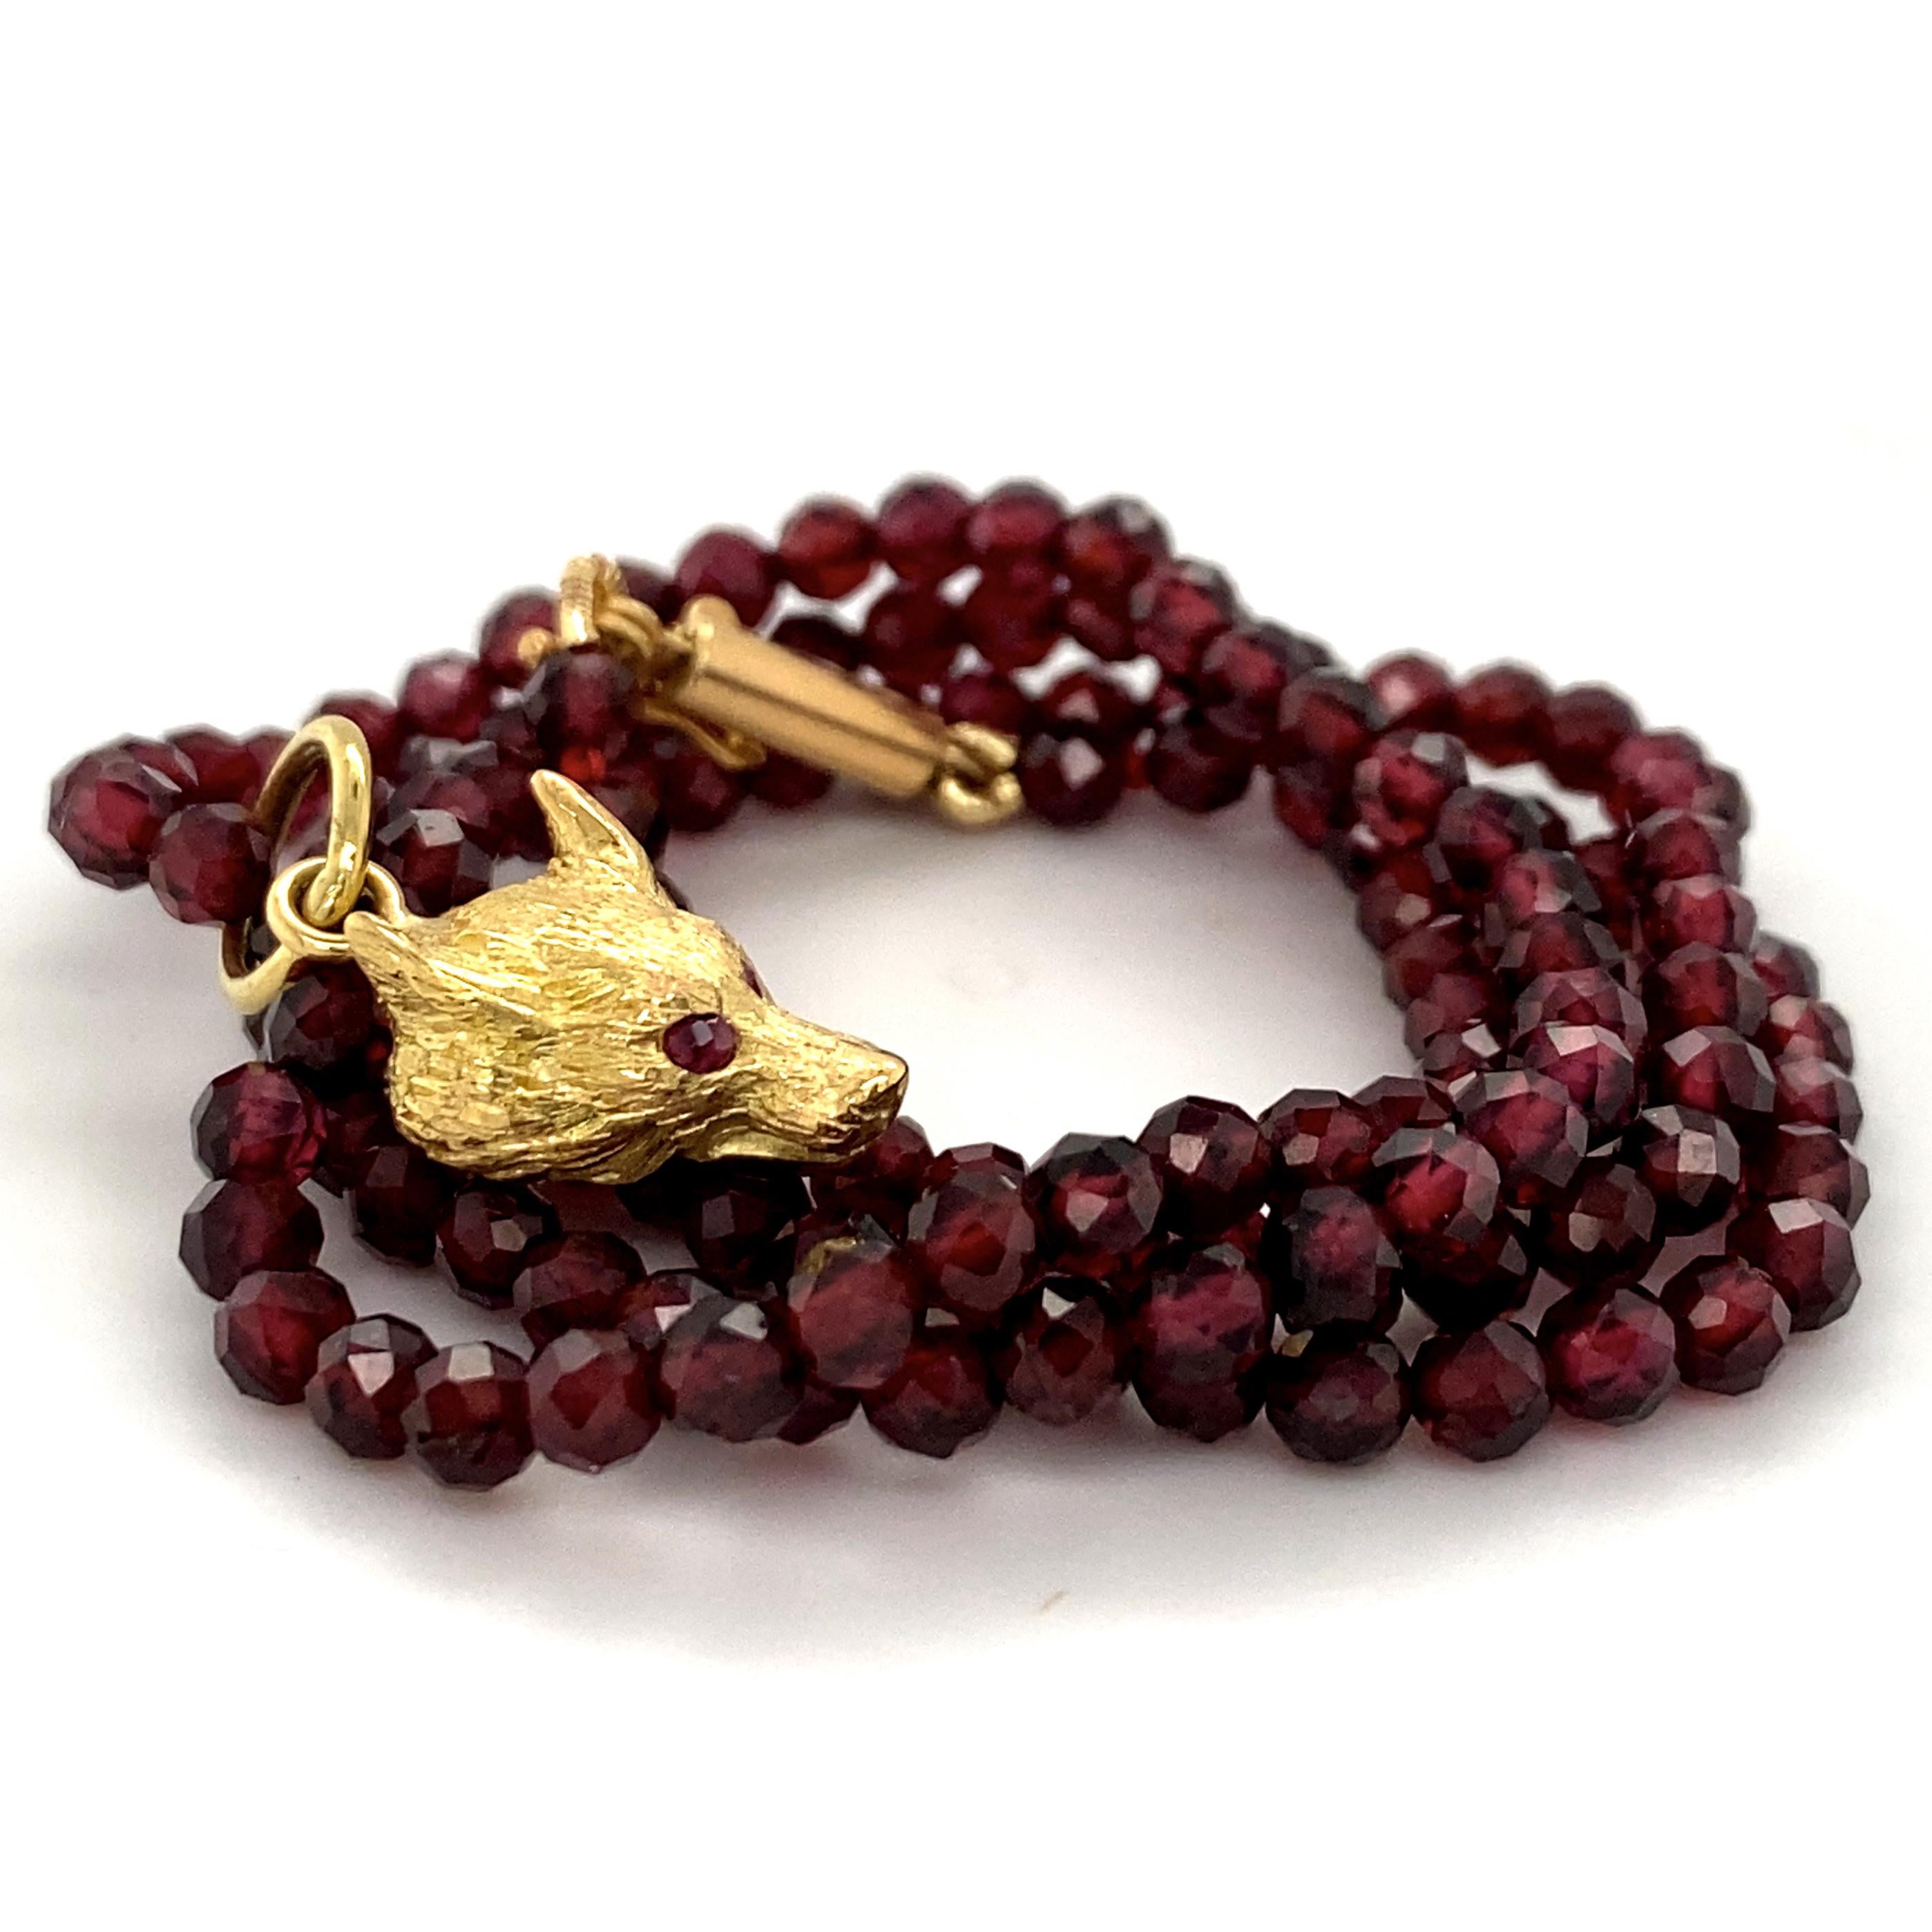 Bead Small Fox or Wolf Pendant with Ruby Eyes in 18K Gold on Faceted Garnet Chain